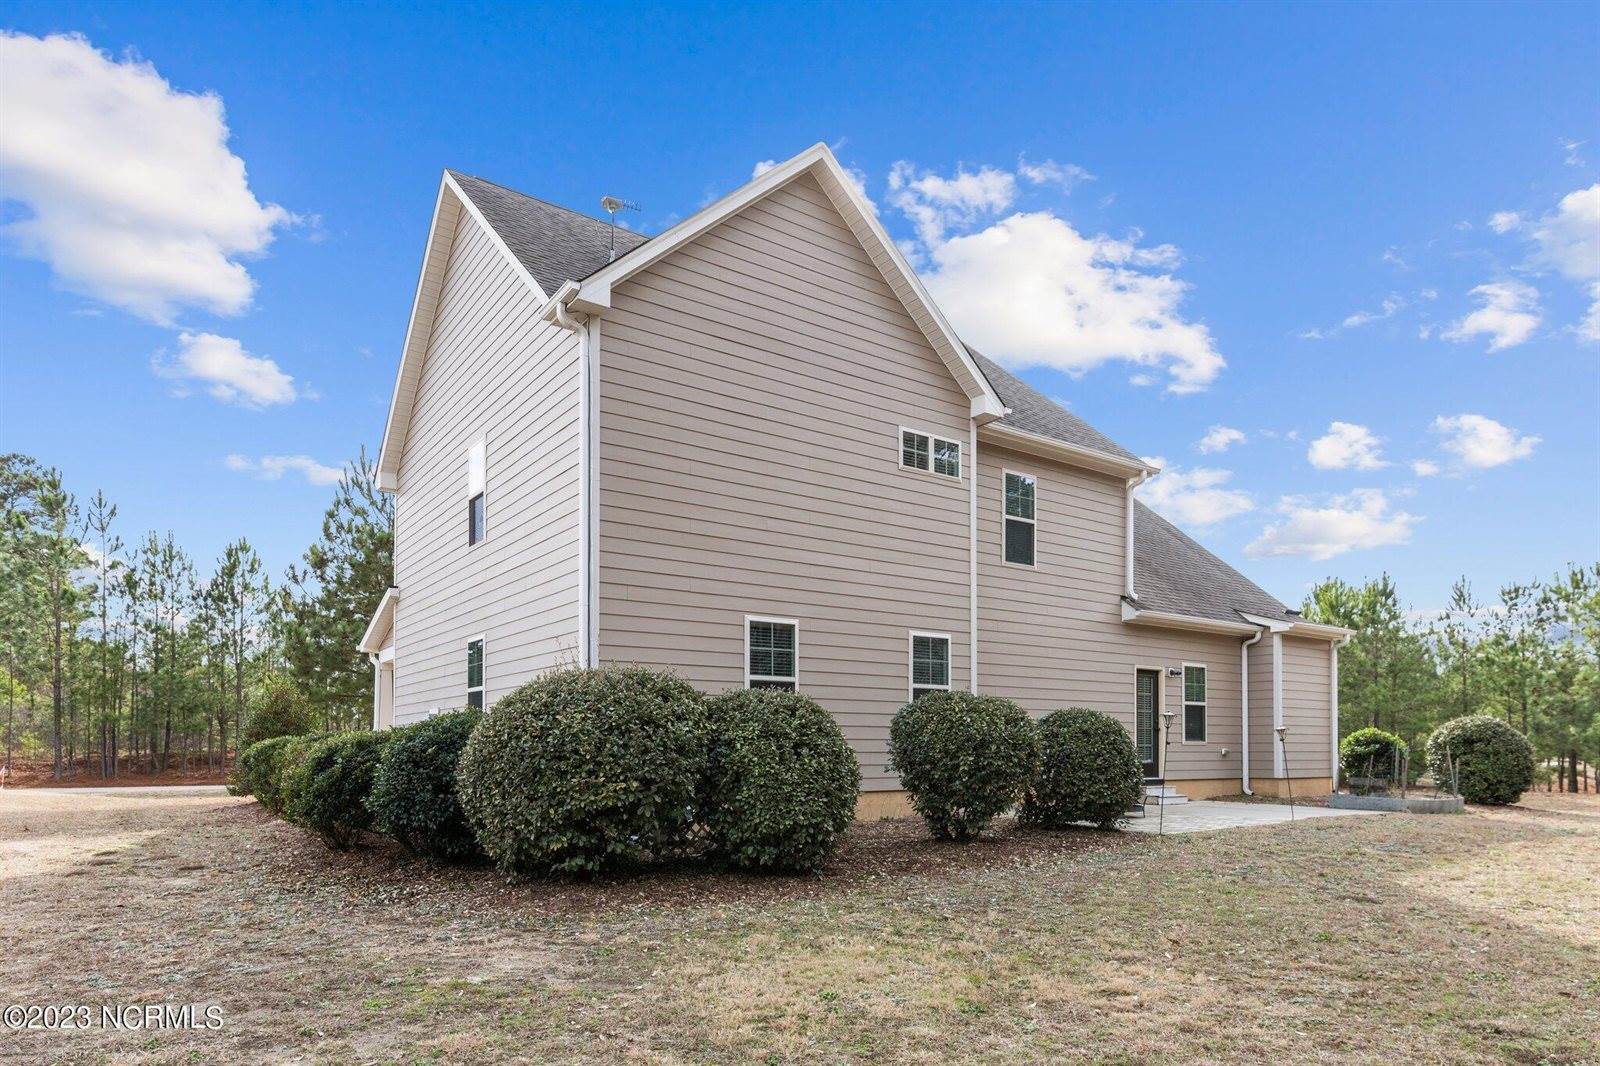 20 Spearhead Drive, Whispering Pines, NC 28327